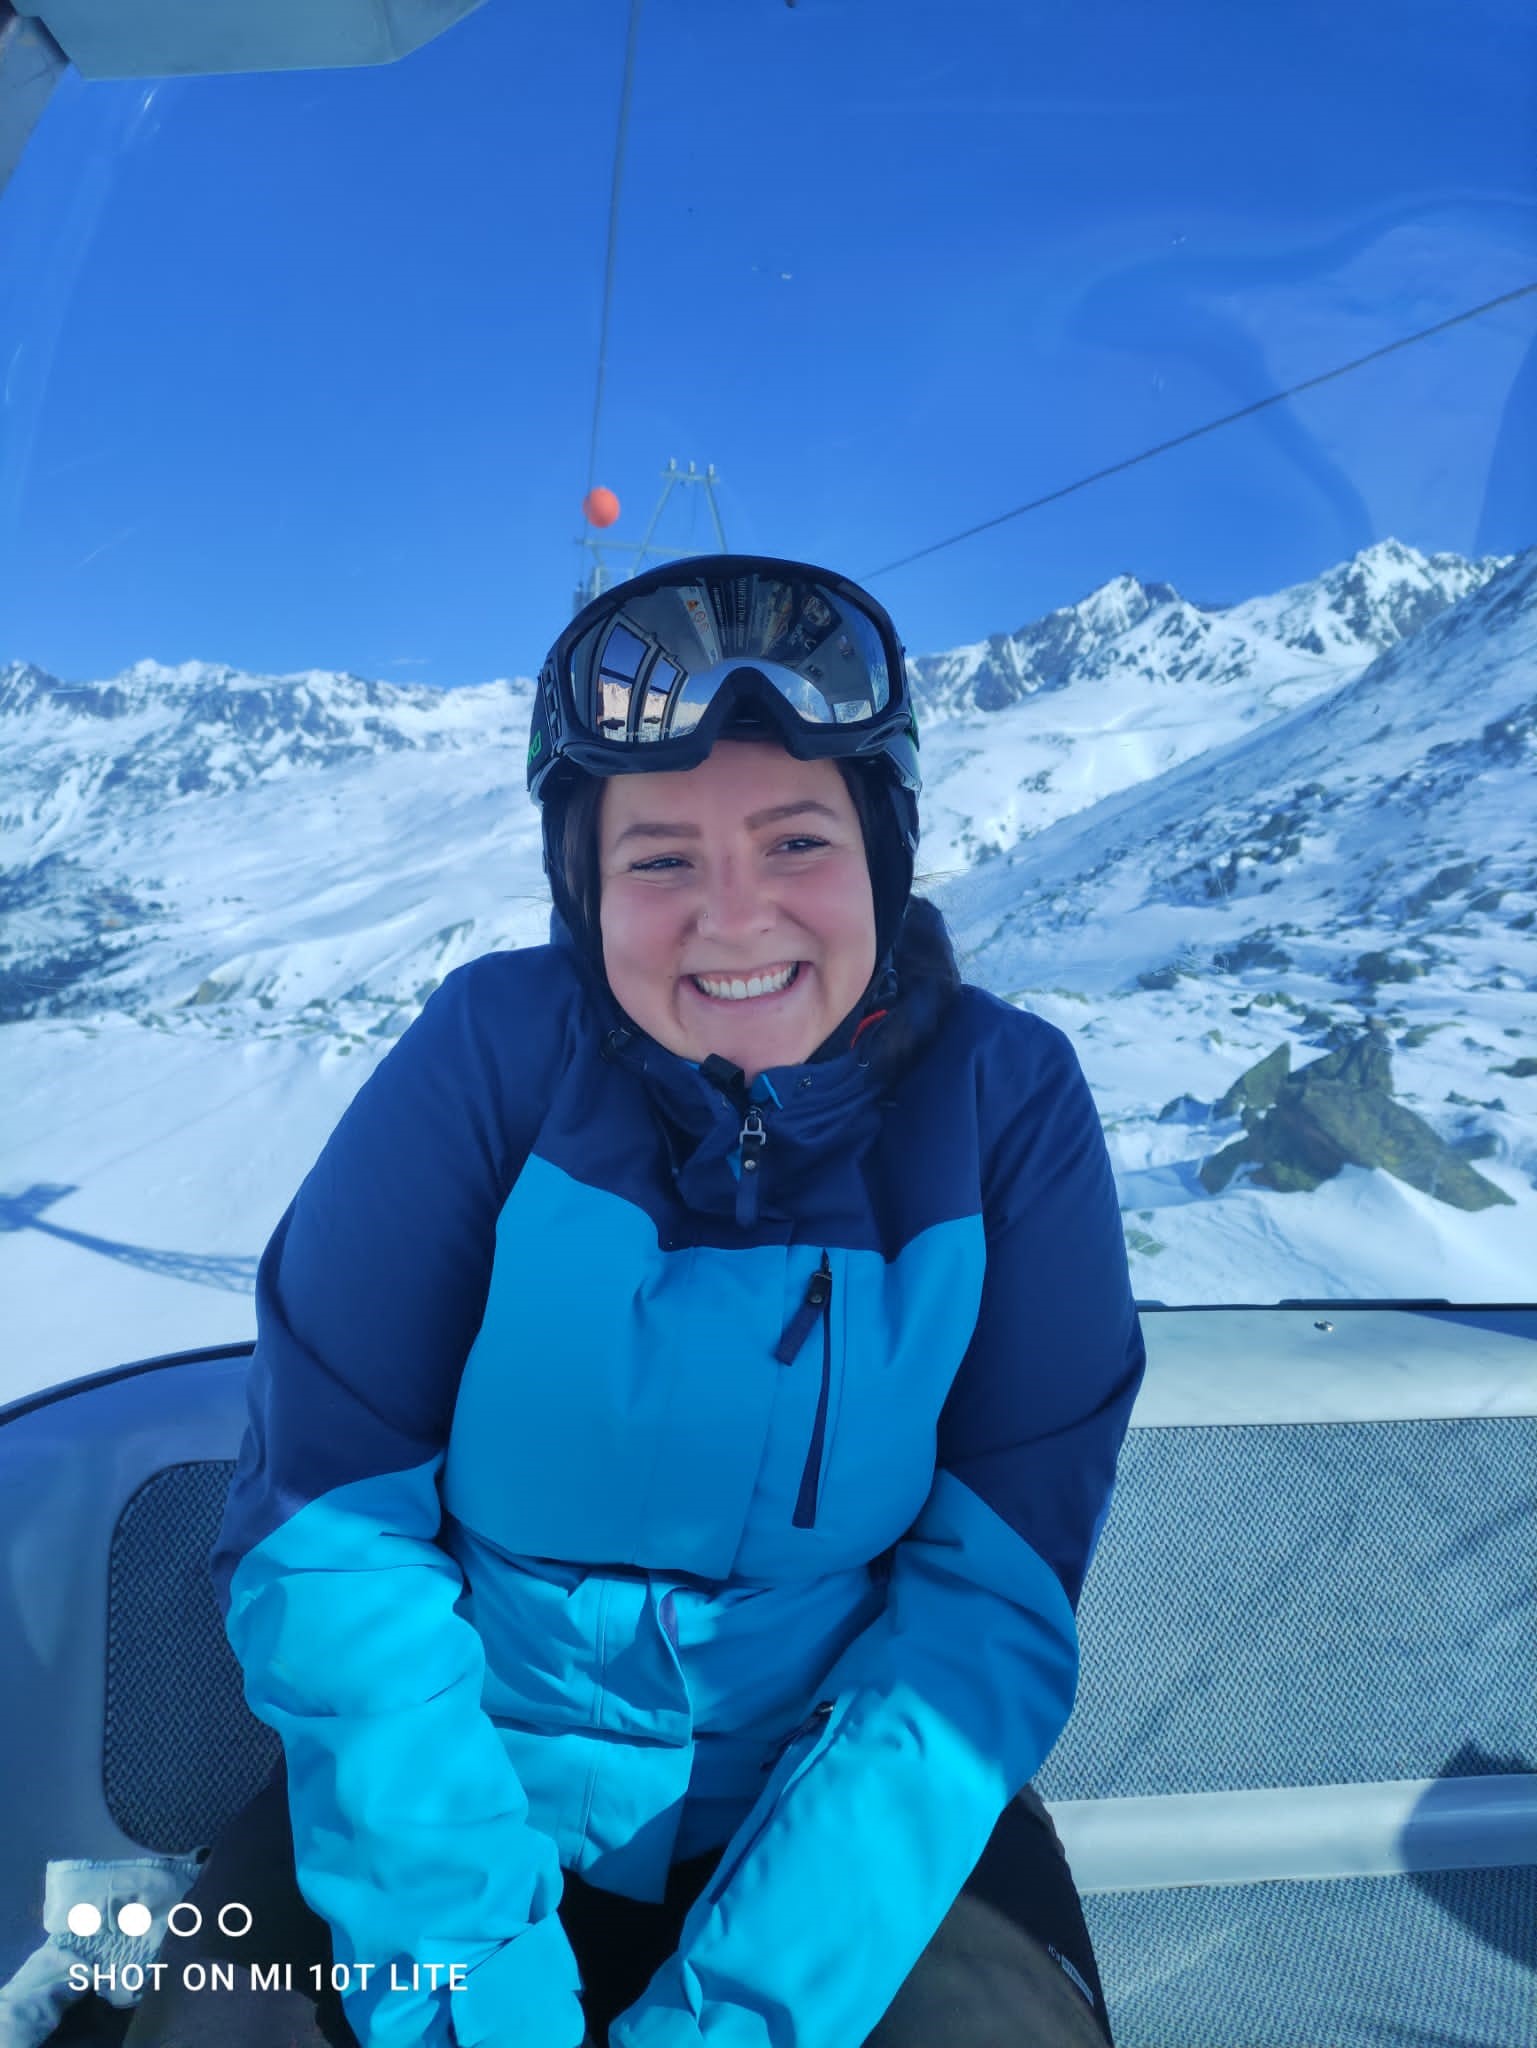 Chantal in a ski suit in the gondola